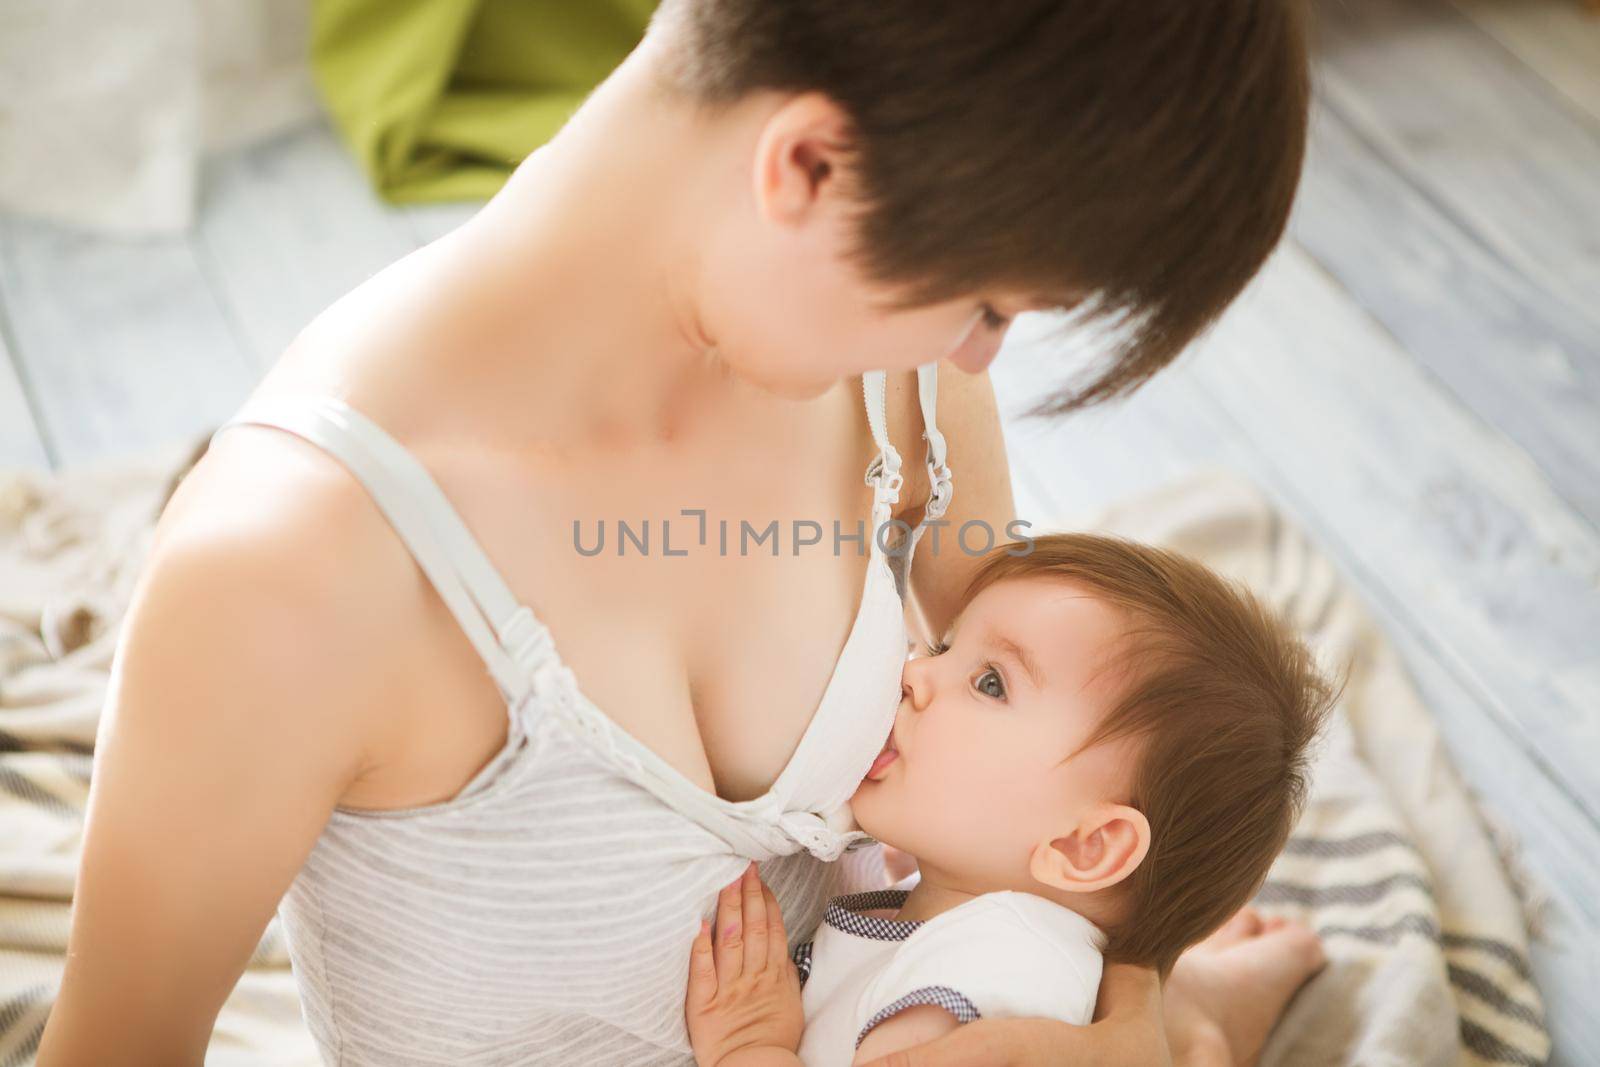 Mother breastfeeding baby in her arms at home. Mom breast feeding her newborn child. Baby eating mother's milk. Concept of lactation infant.